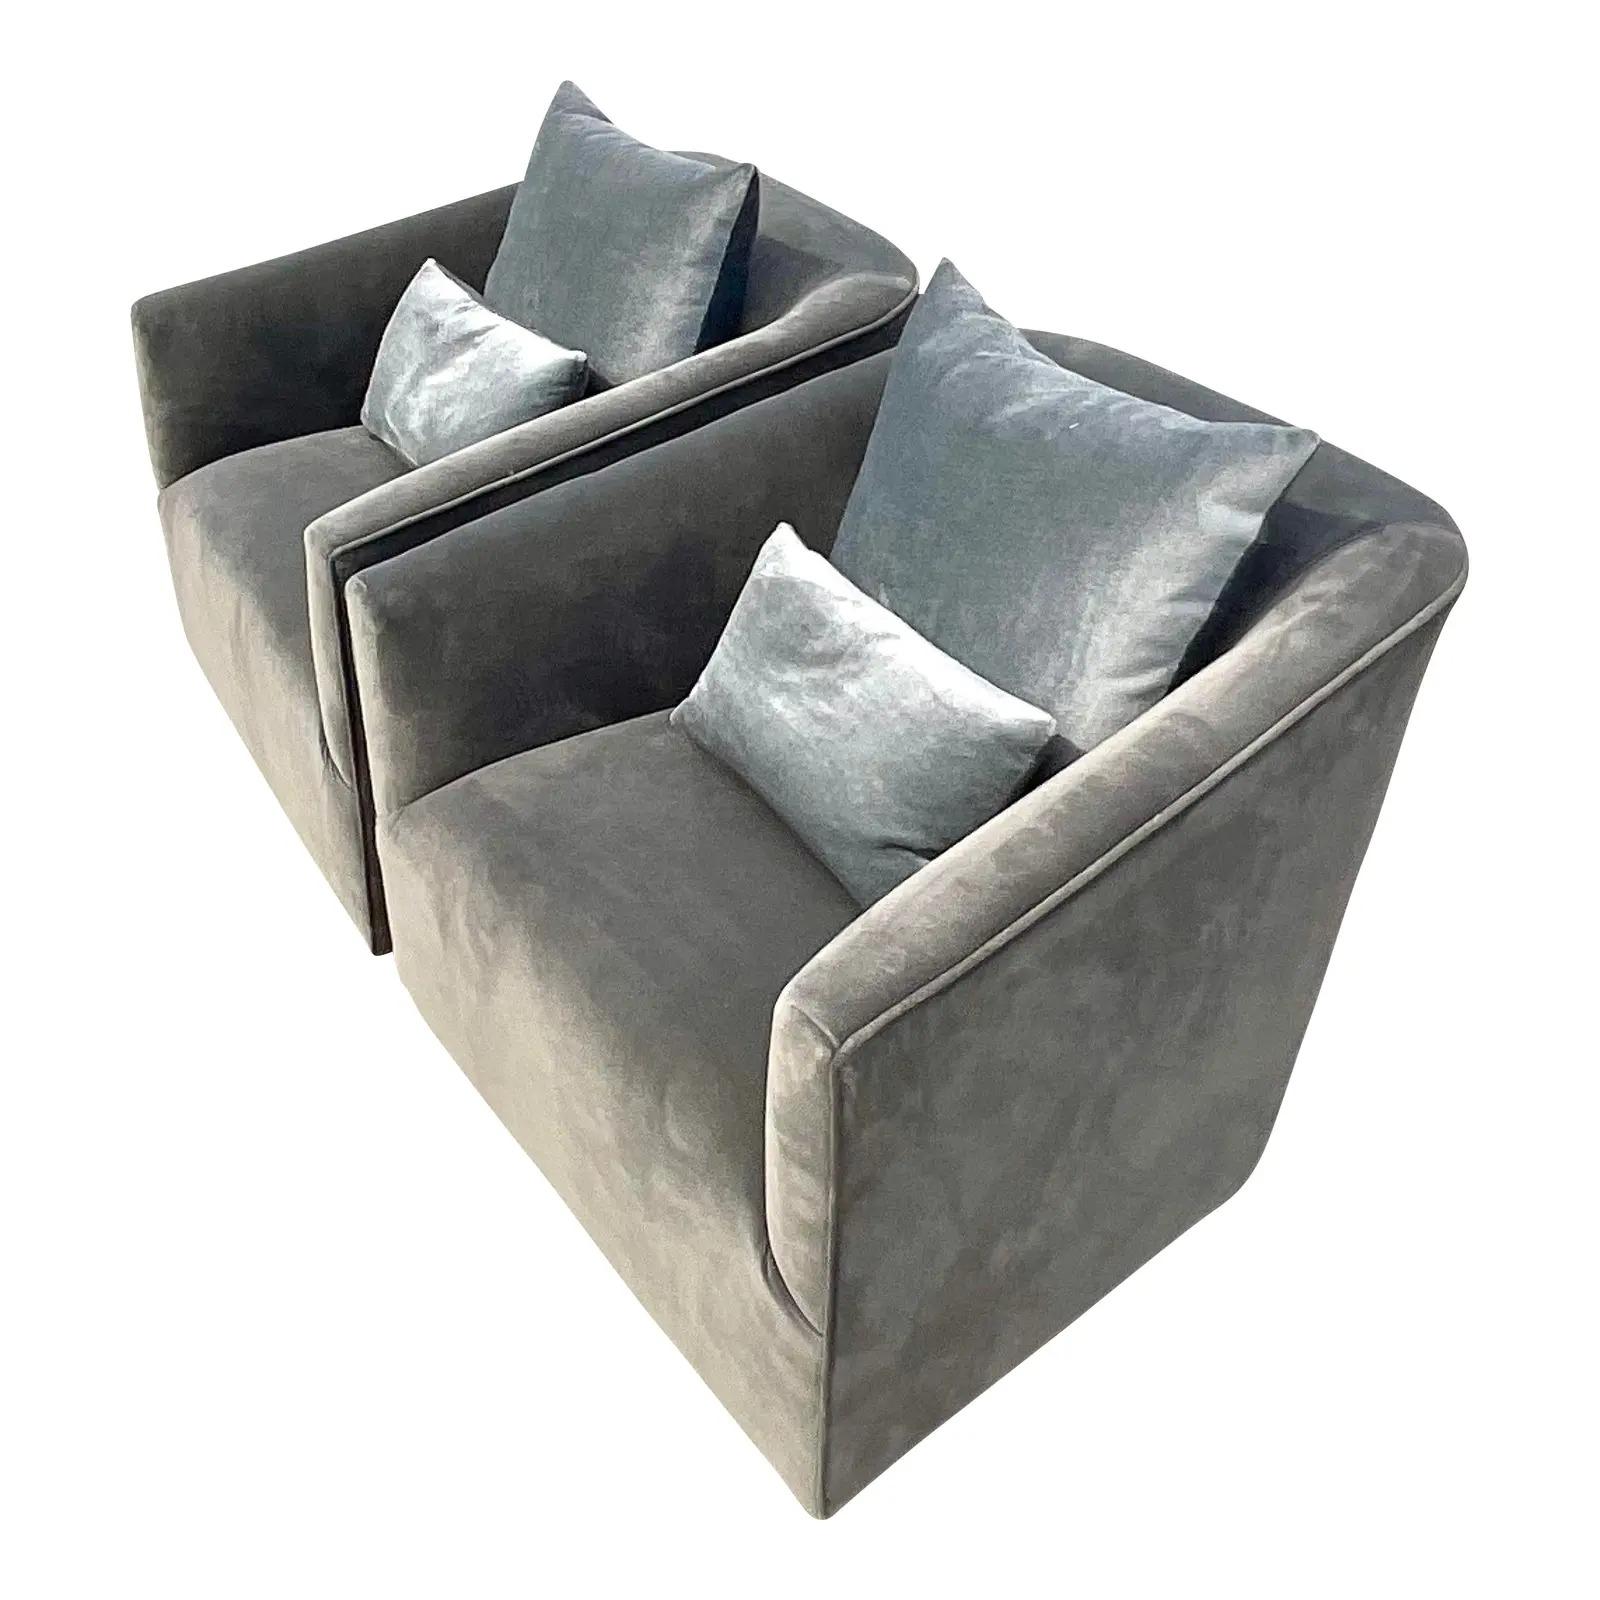 A fantastic pair of Restoration Hardware lounge chairs. The coveted Shelter Arm chair style in a chic smoke colored velvet. Rests on an ebony wooden plinth. Coordinating down throw pillows included. Acquired from a Palm Beach estate.